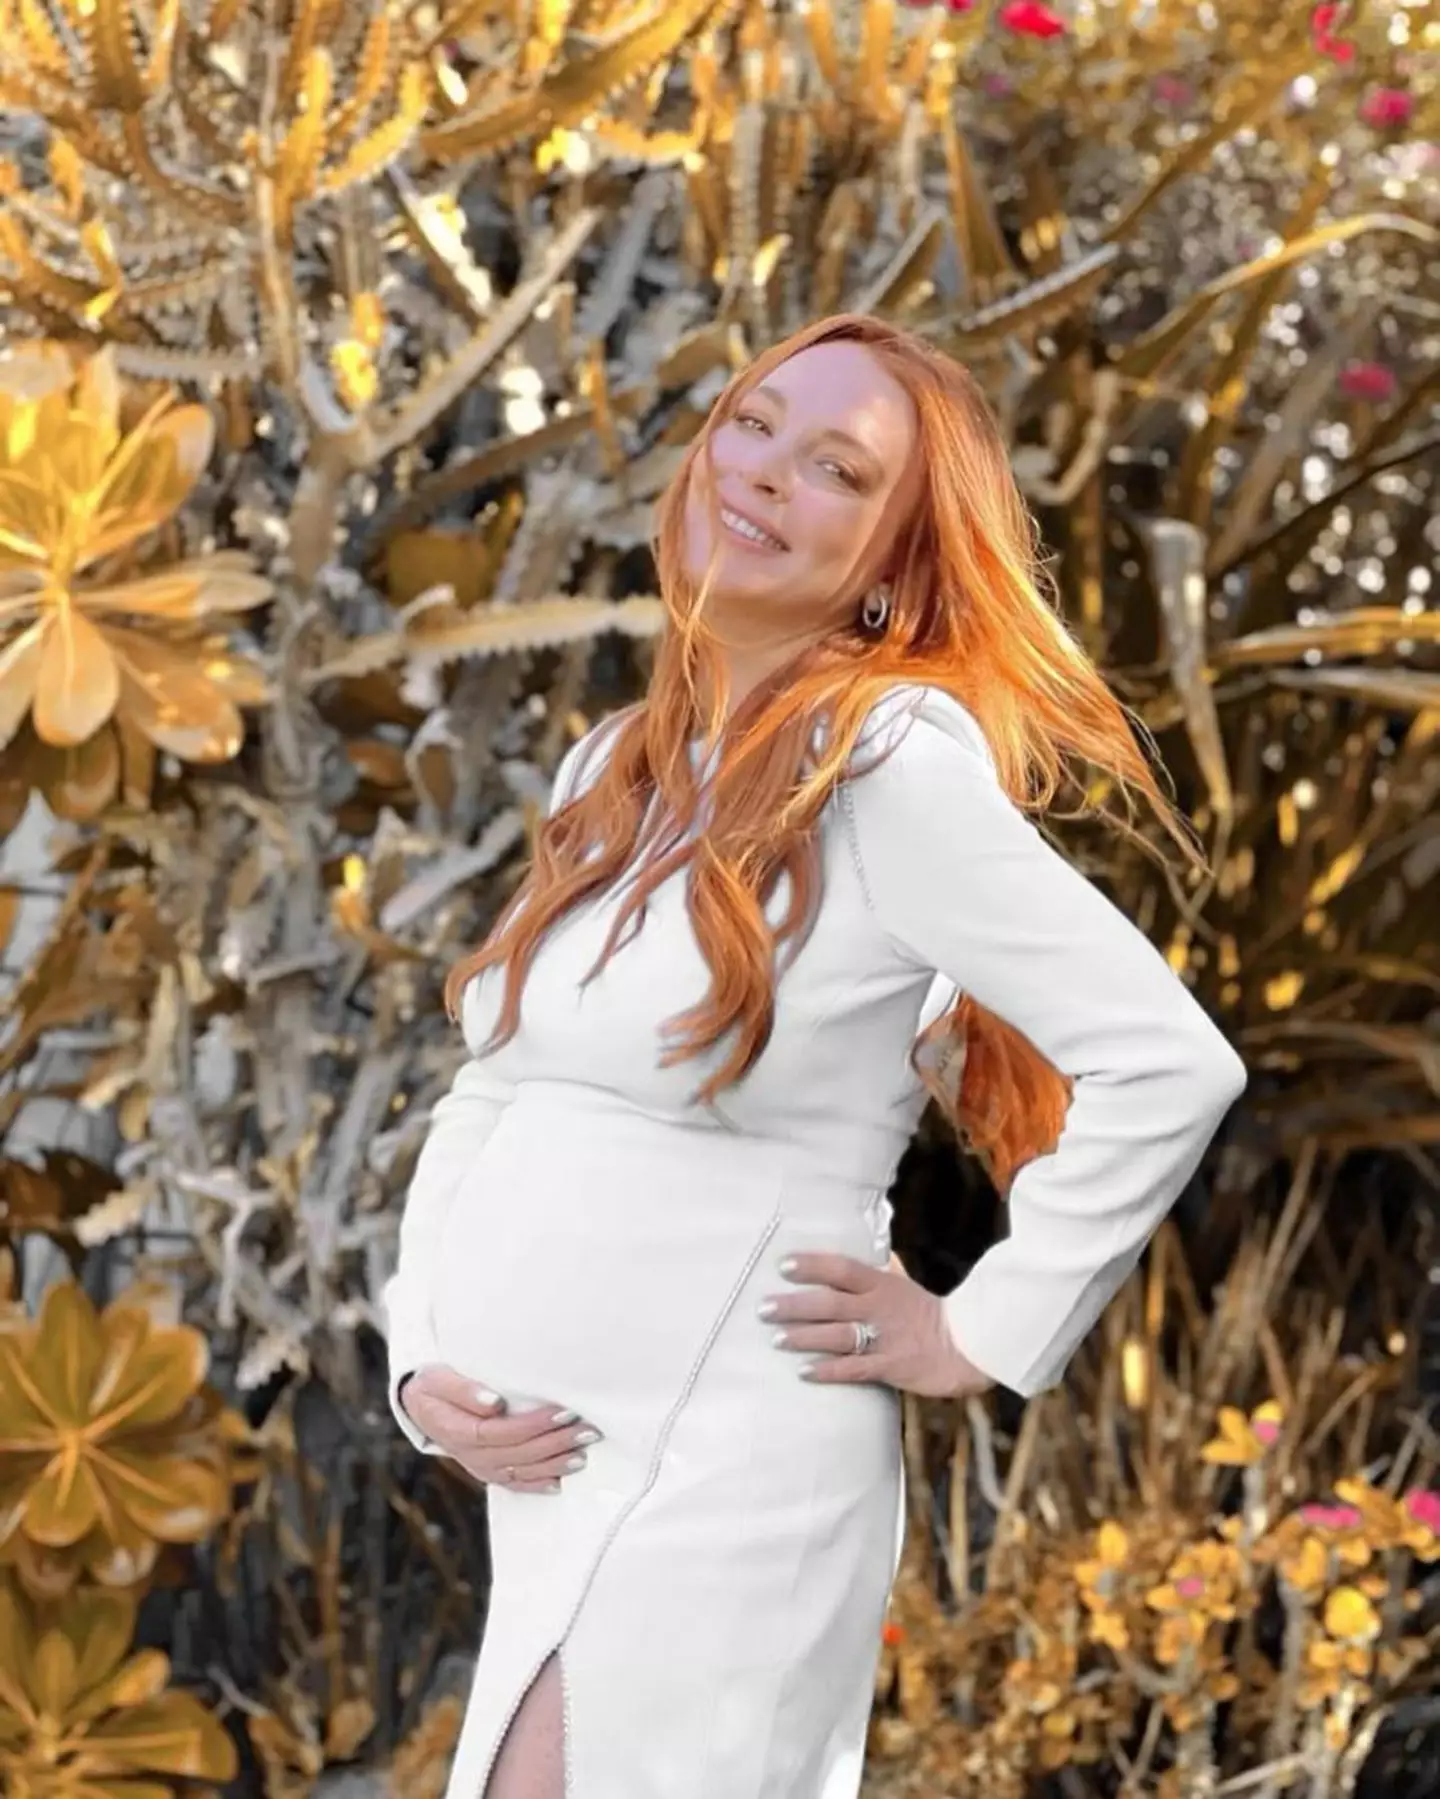 Lindsay Lohan shared a picture of her baby bump.